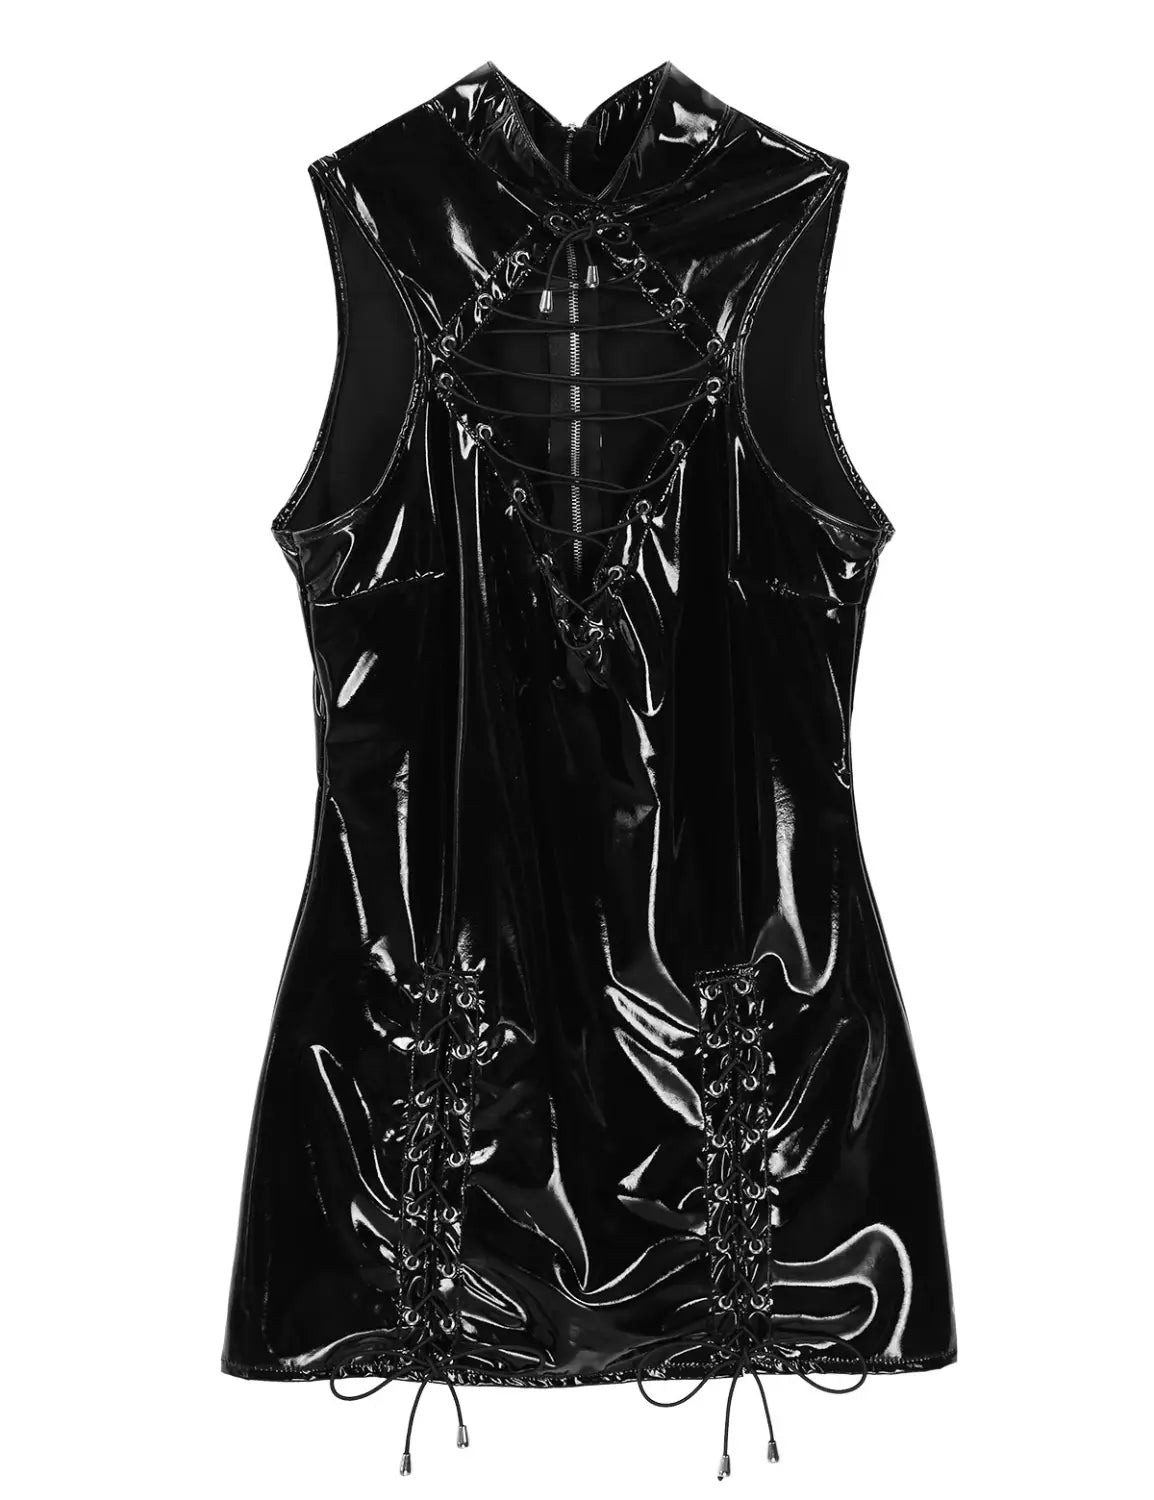 Sexy Patent Leather Strap Dress - Unleash Your Bold Side!